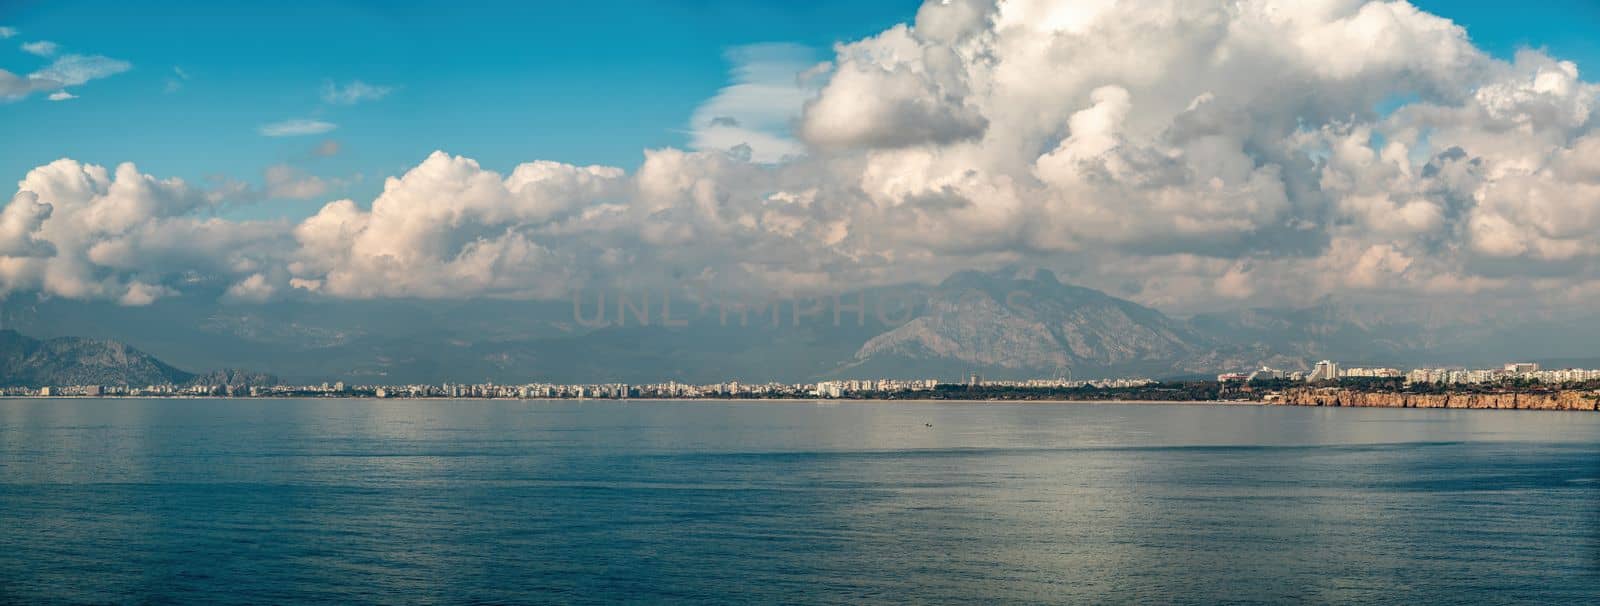 Aerial panoramic view of Antalya Turkey on a partly cloudy sunrise by Sonat